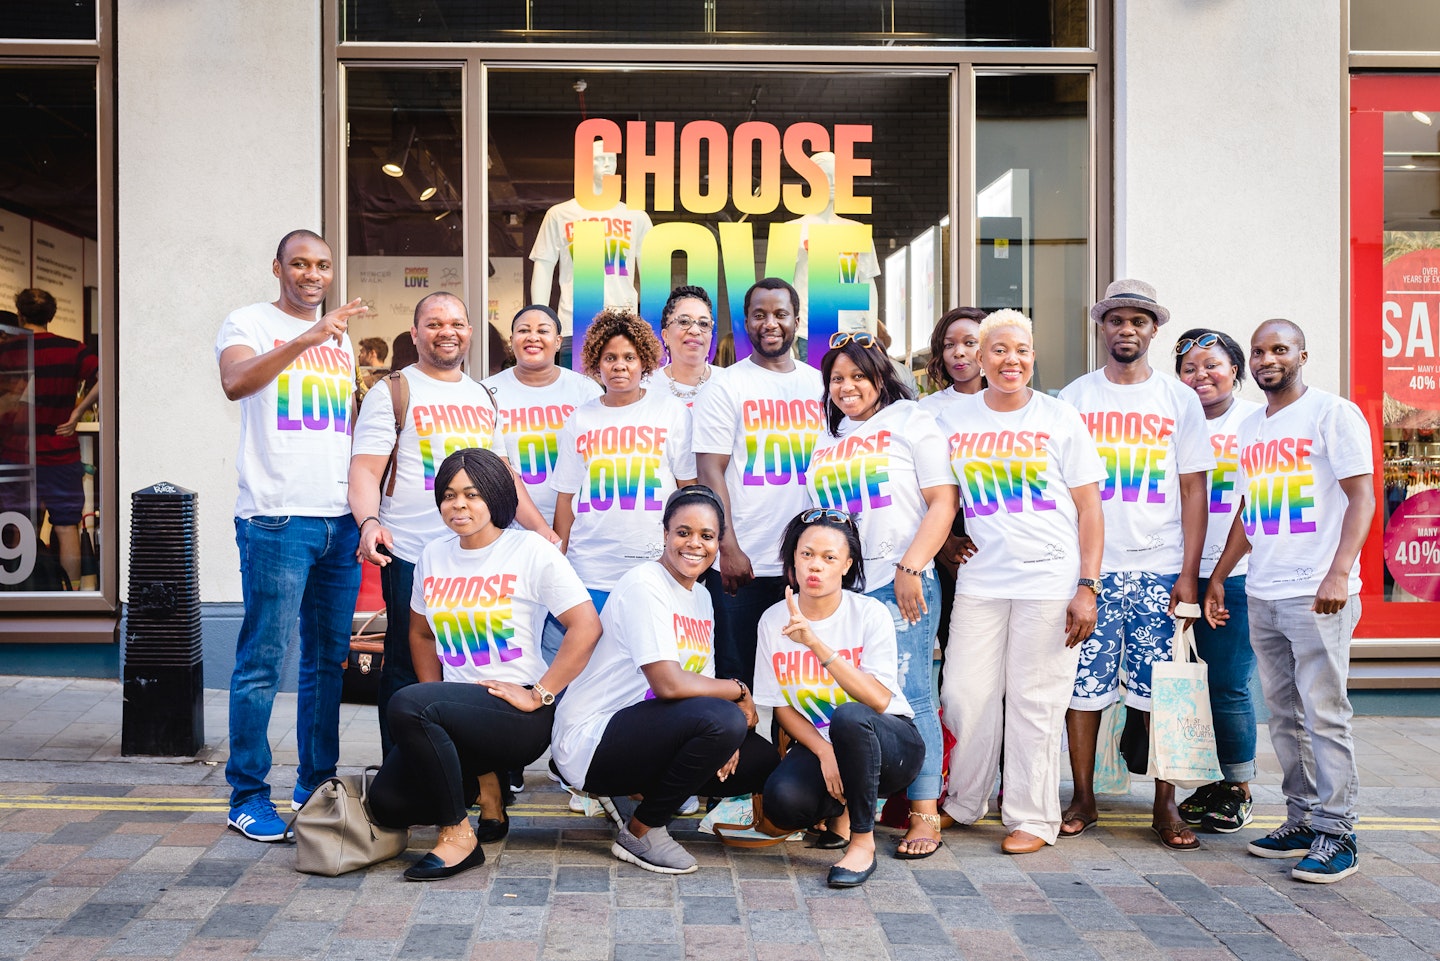 The Rainbow Choose Love pop-up store in London